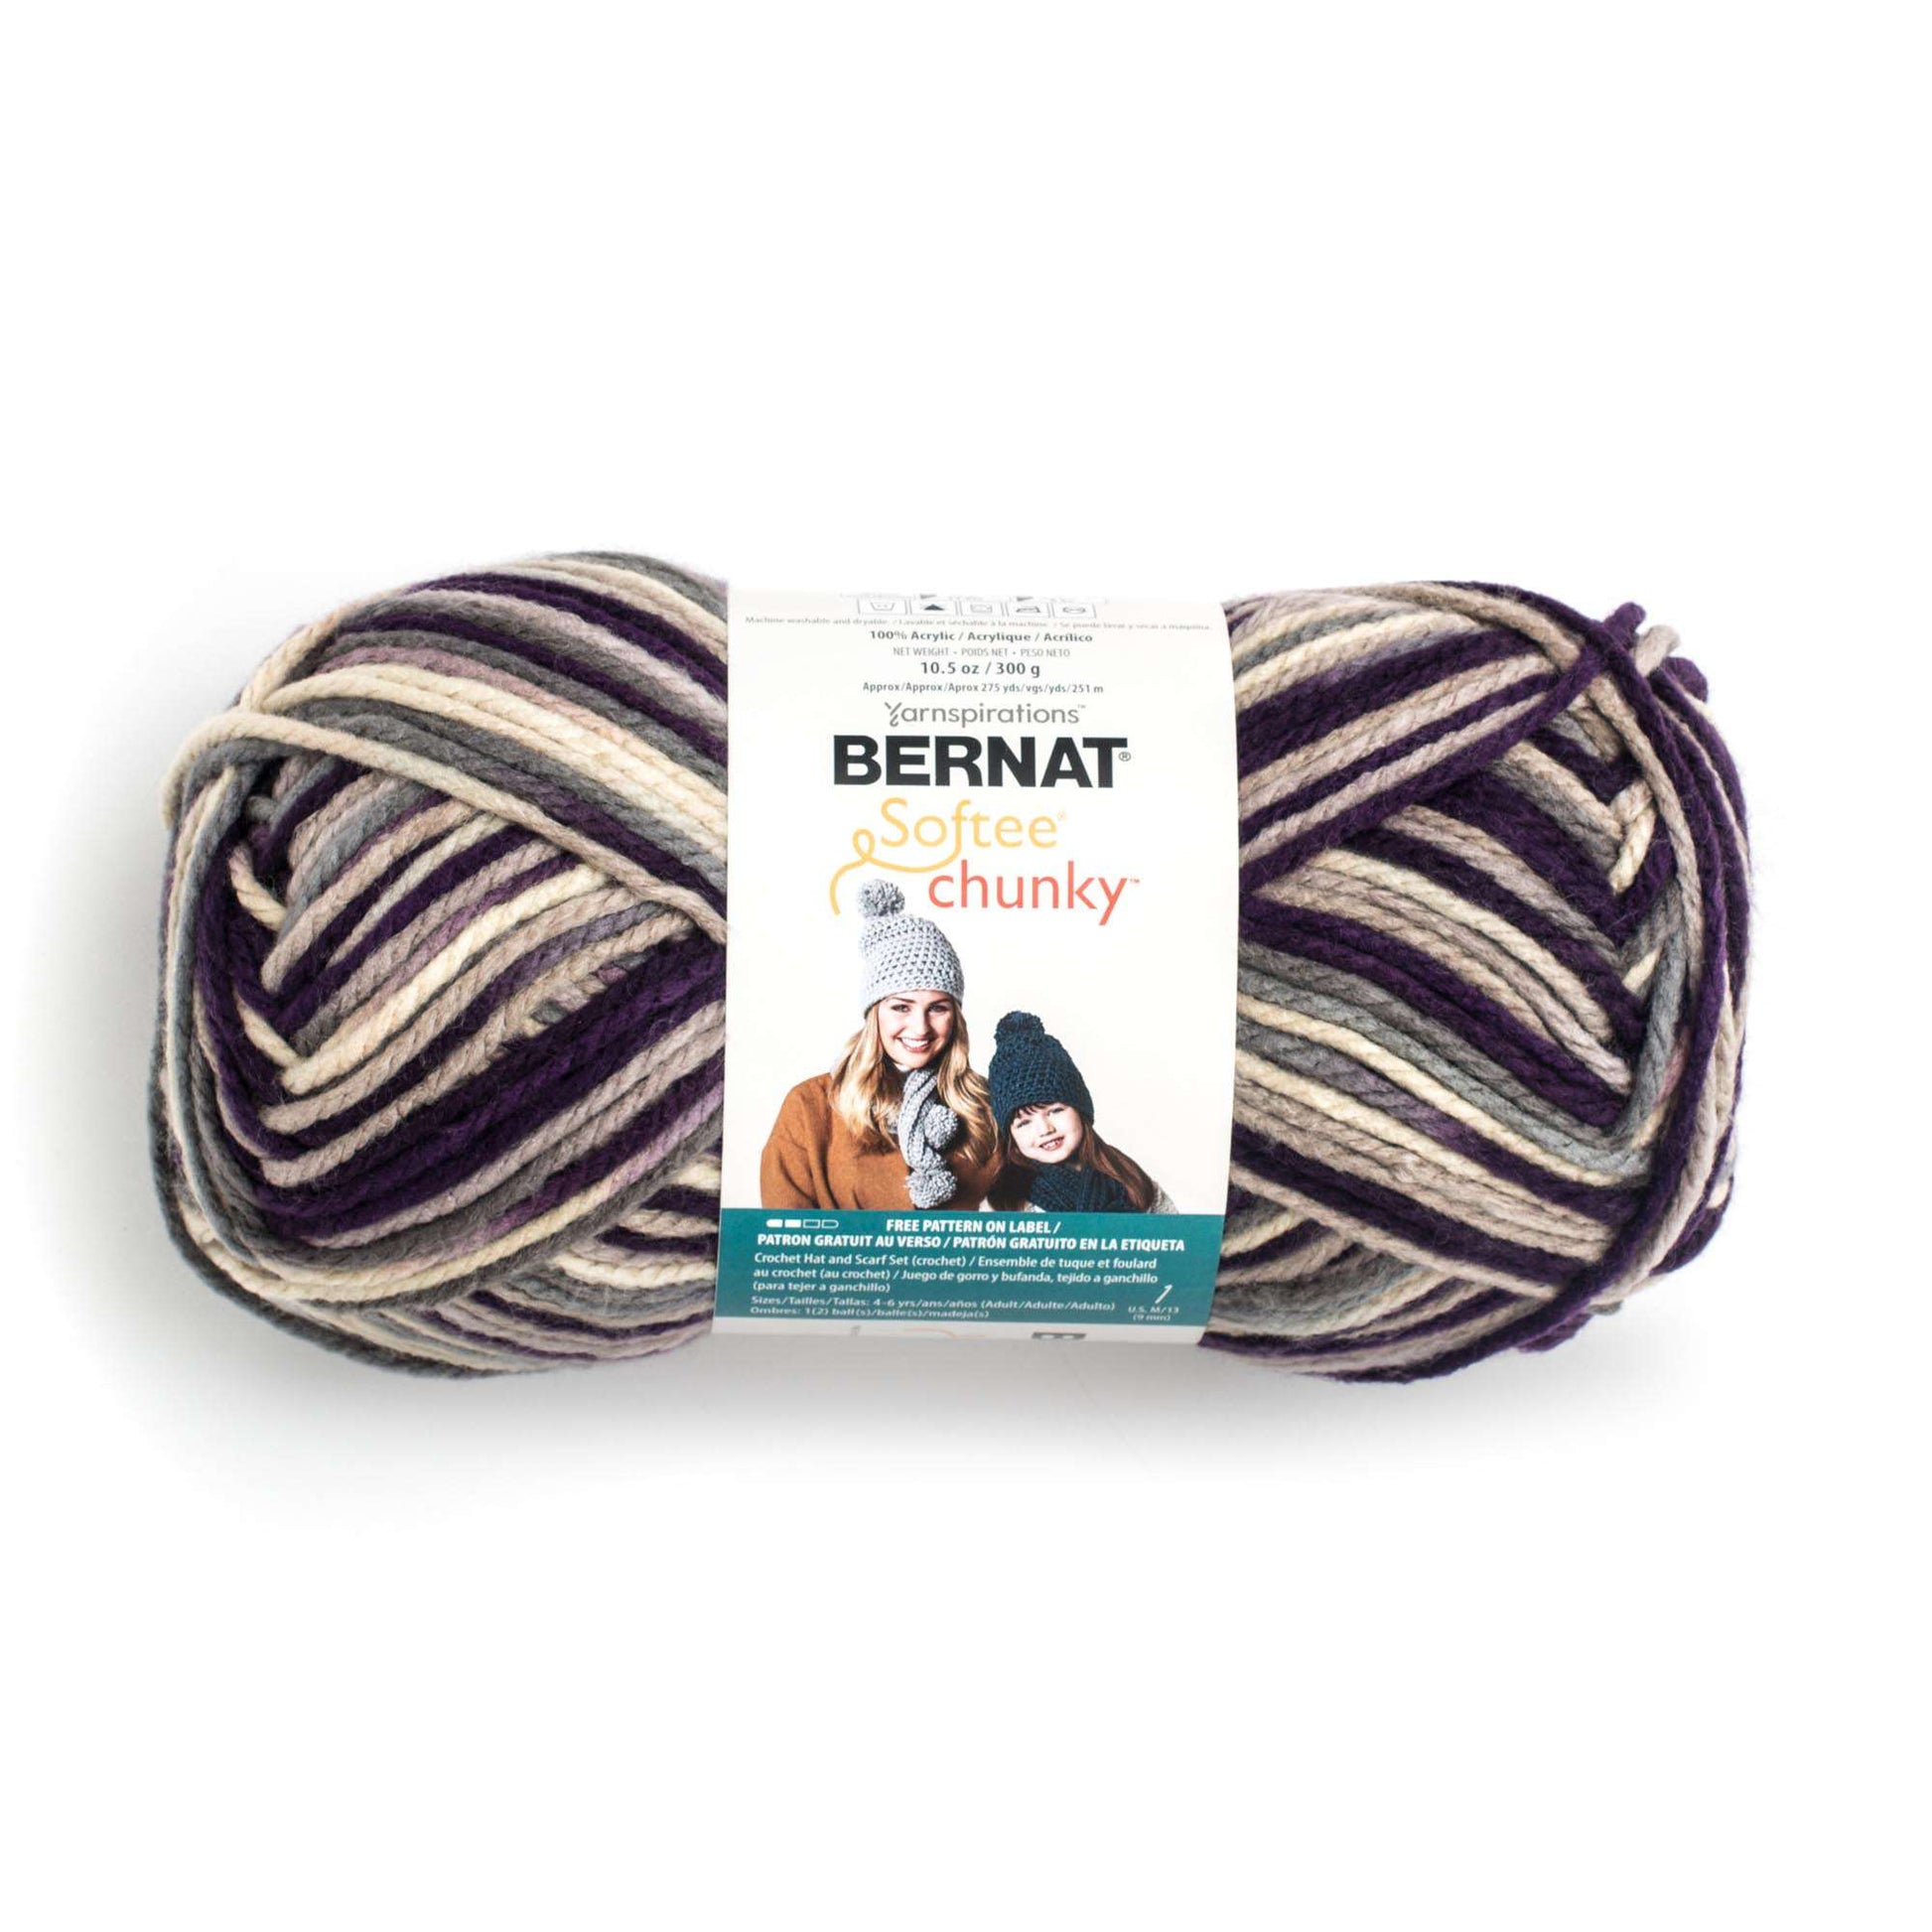 Bernat Softee Chunky Ombres Yarn (300g/10.5oz) - Clearance Shades Intrigue Ombre